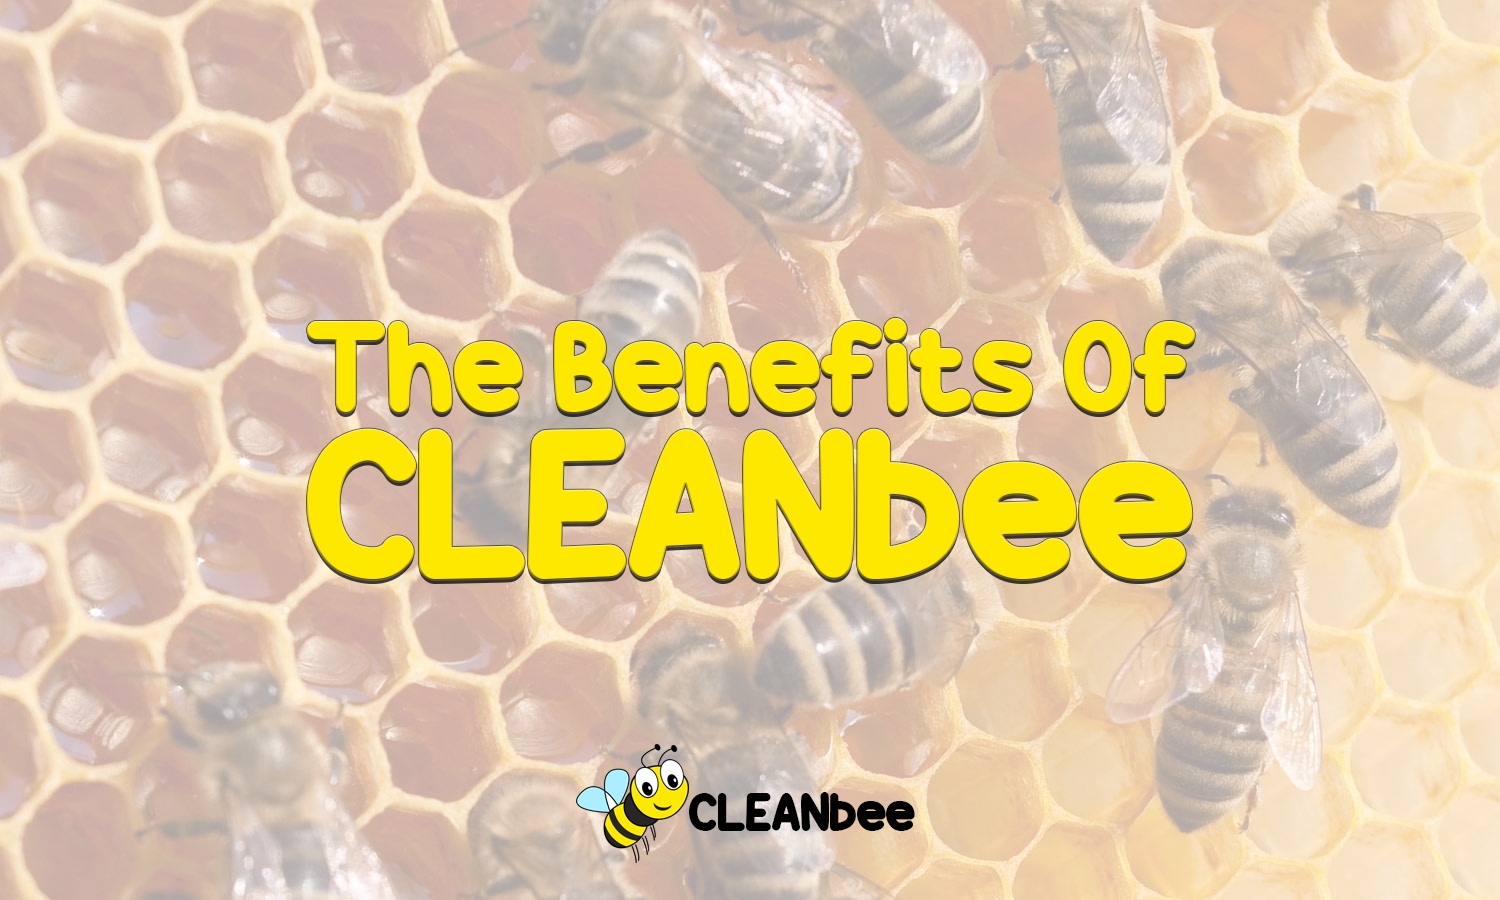 The Benefits Of CLEANbee